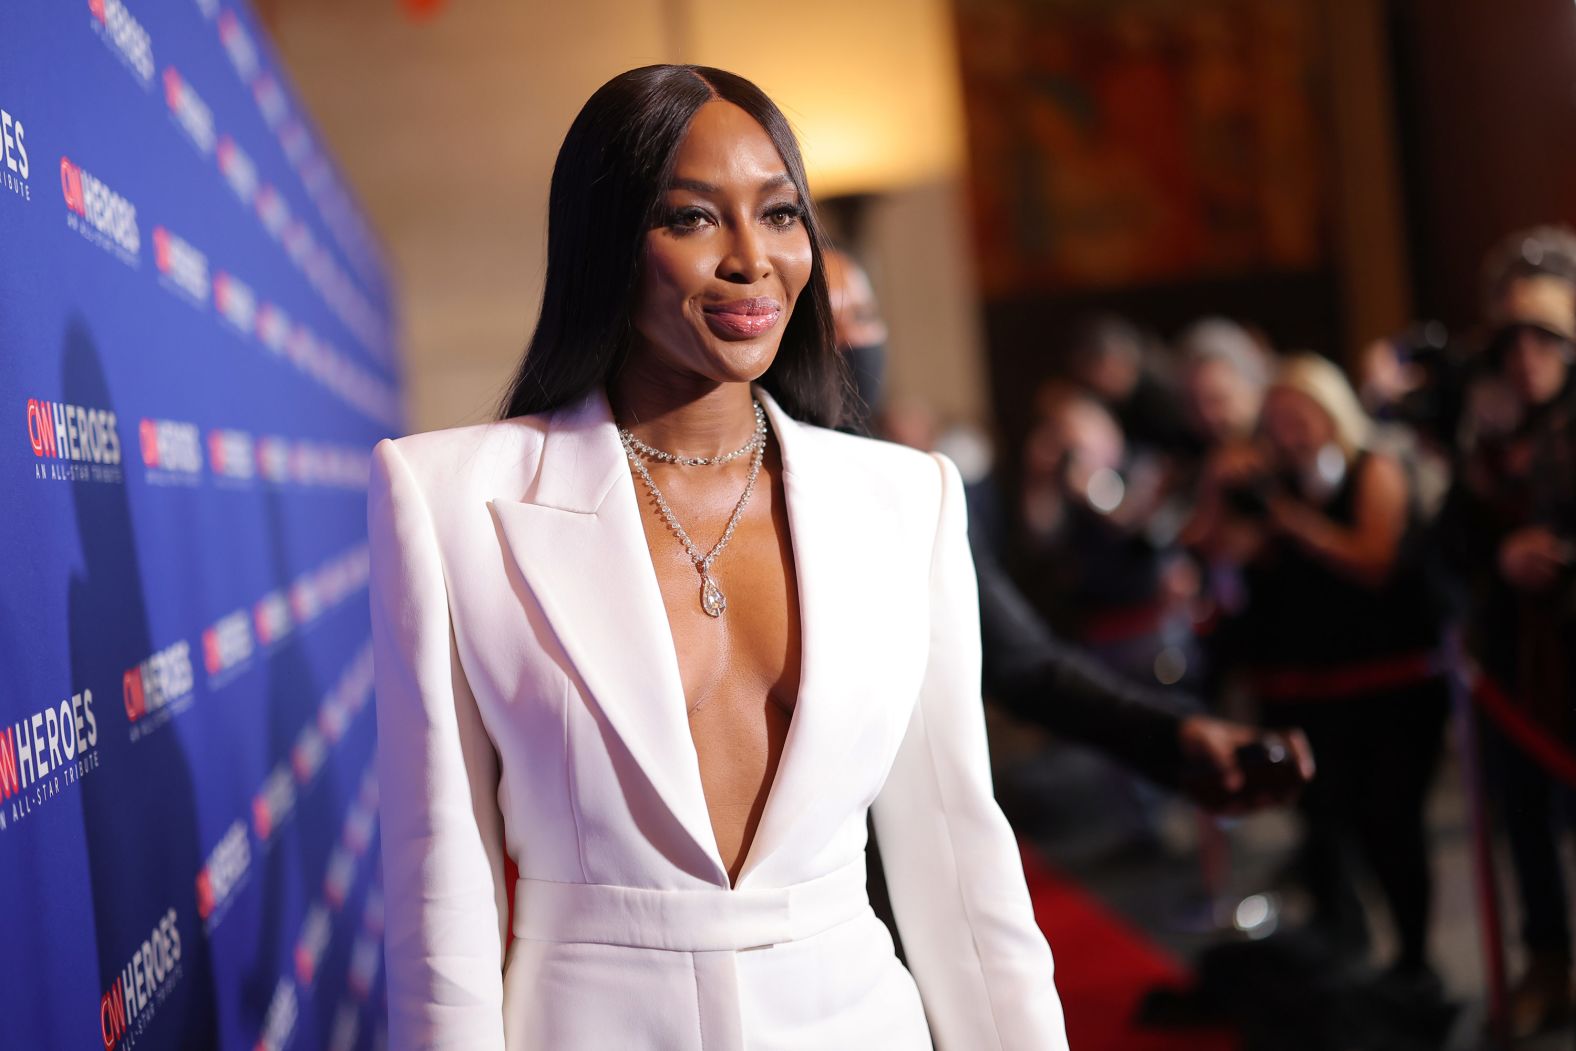 Naomi Campbell walks the red carpet. Campbell served as one of the event's presenters, honoring <a href="index.php?page=&url=https%3A%2F%2Fwww.cnn.com%2F2022%2F07%2F14%2Fworld%2Feducation-technology-recycling-kenya-poverty-cnnheroes%2Findex.html" target="_blank">Nelly Cheboi</a>.